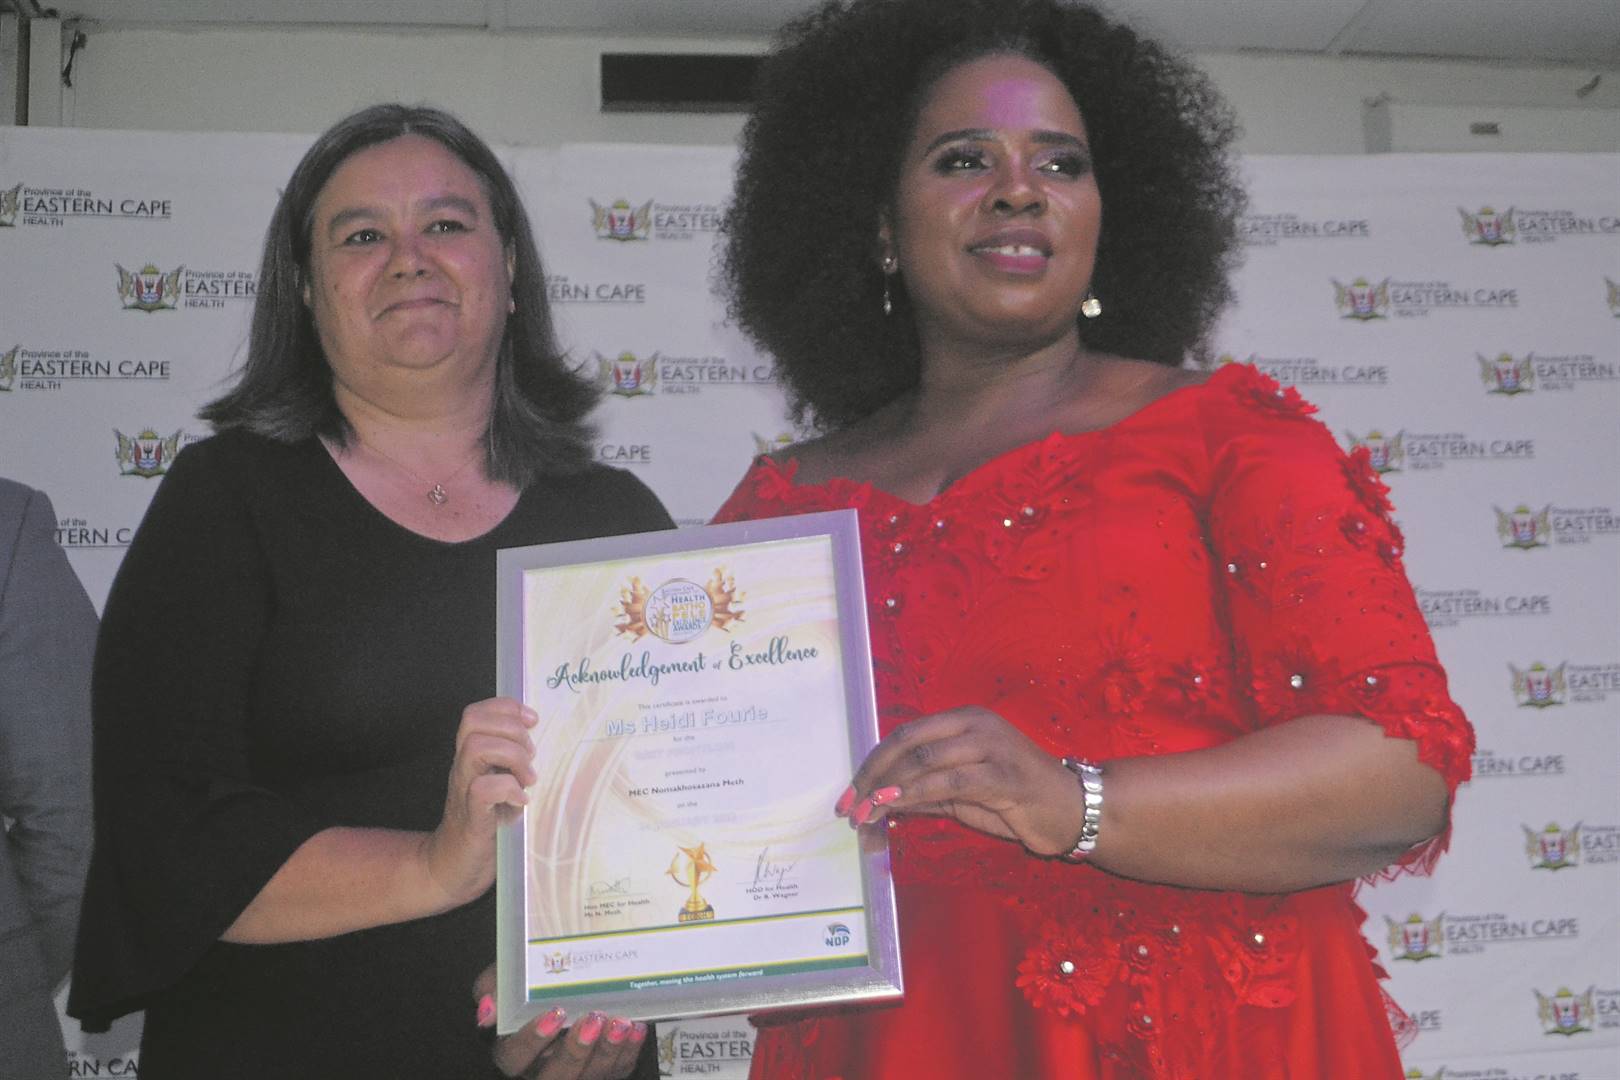 Excellence in healthcare services rewarded